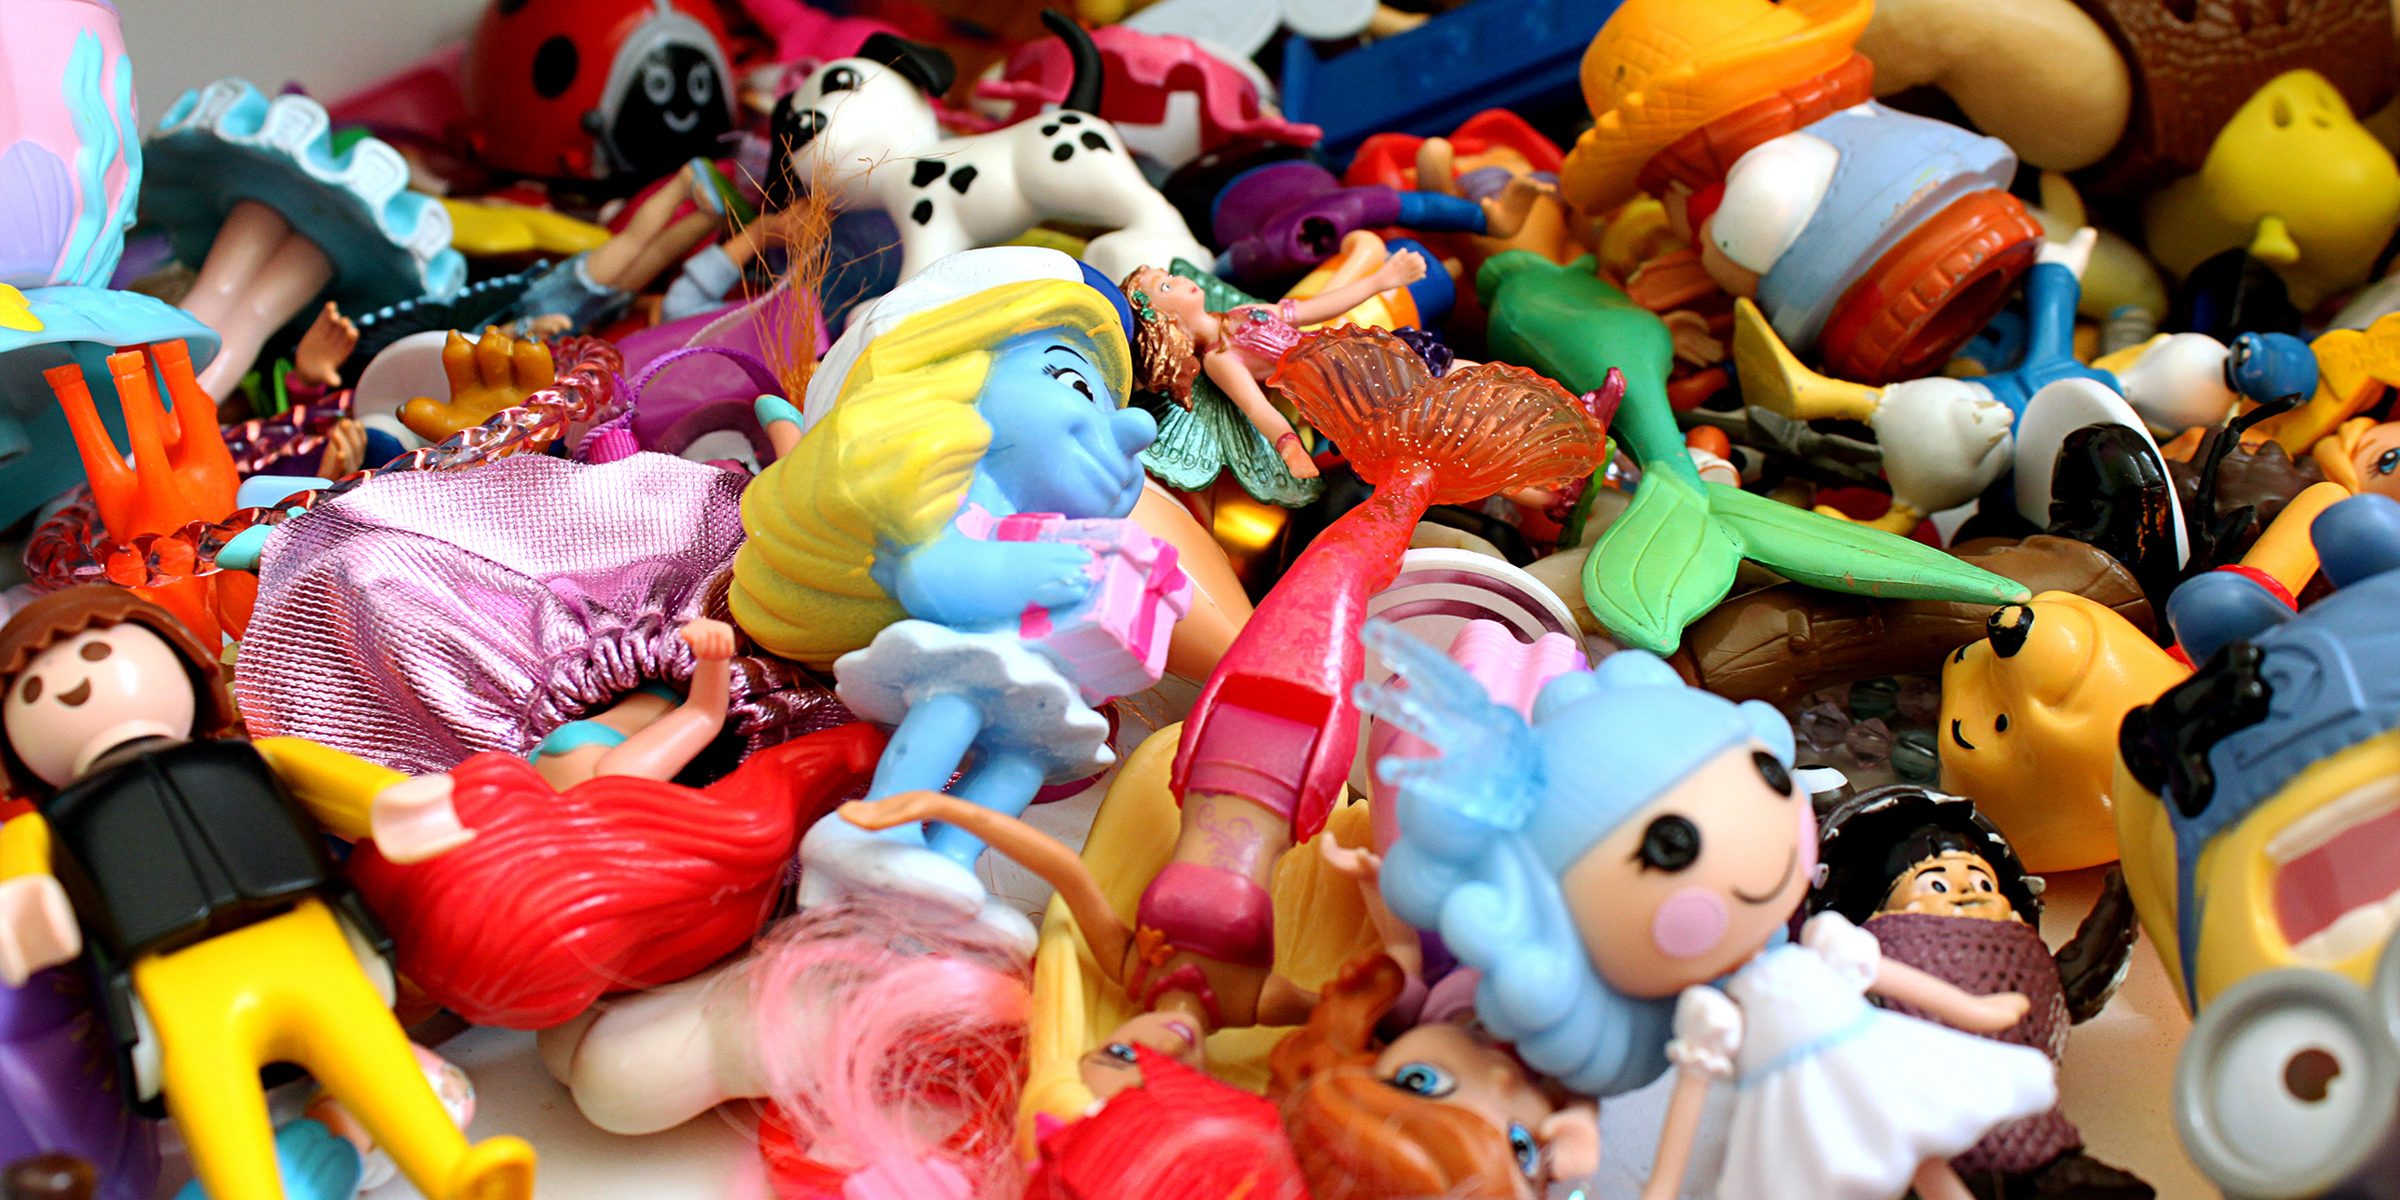 A bunch of toys | Source: Shutterstock